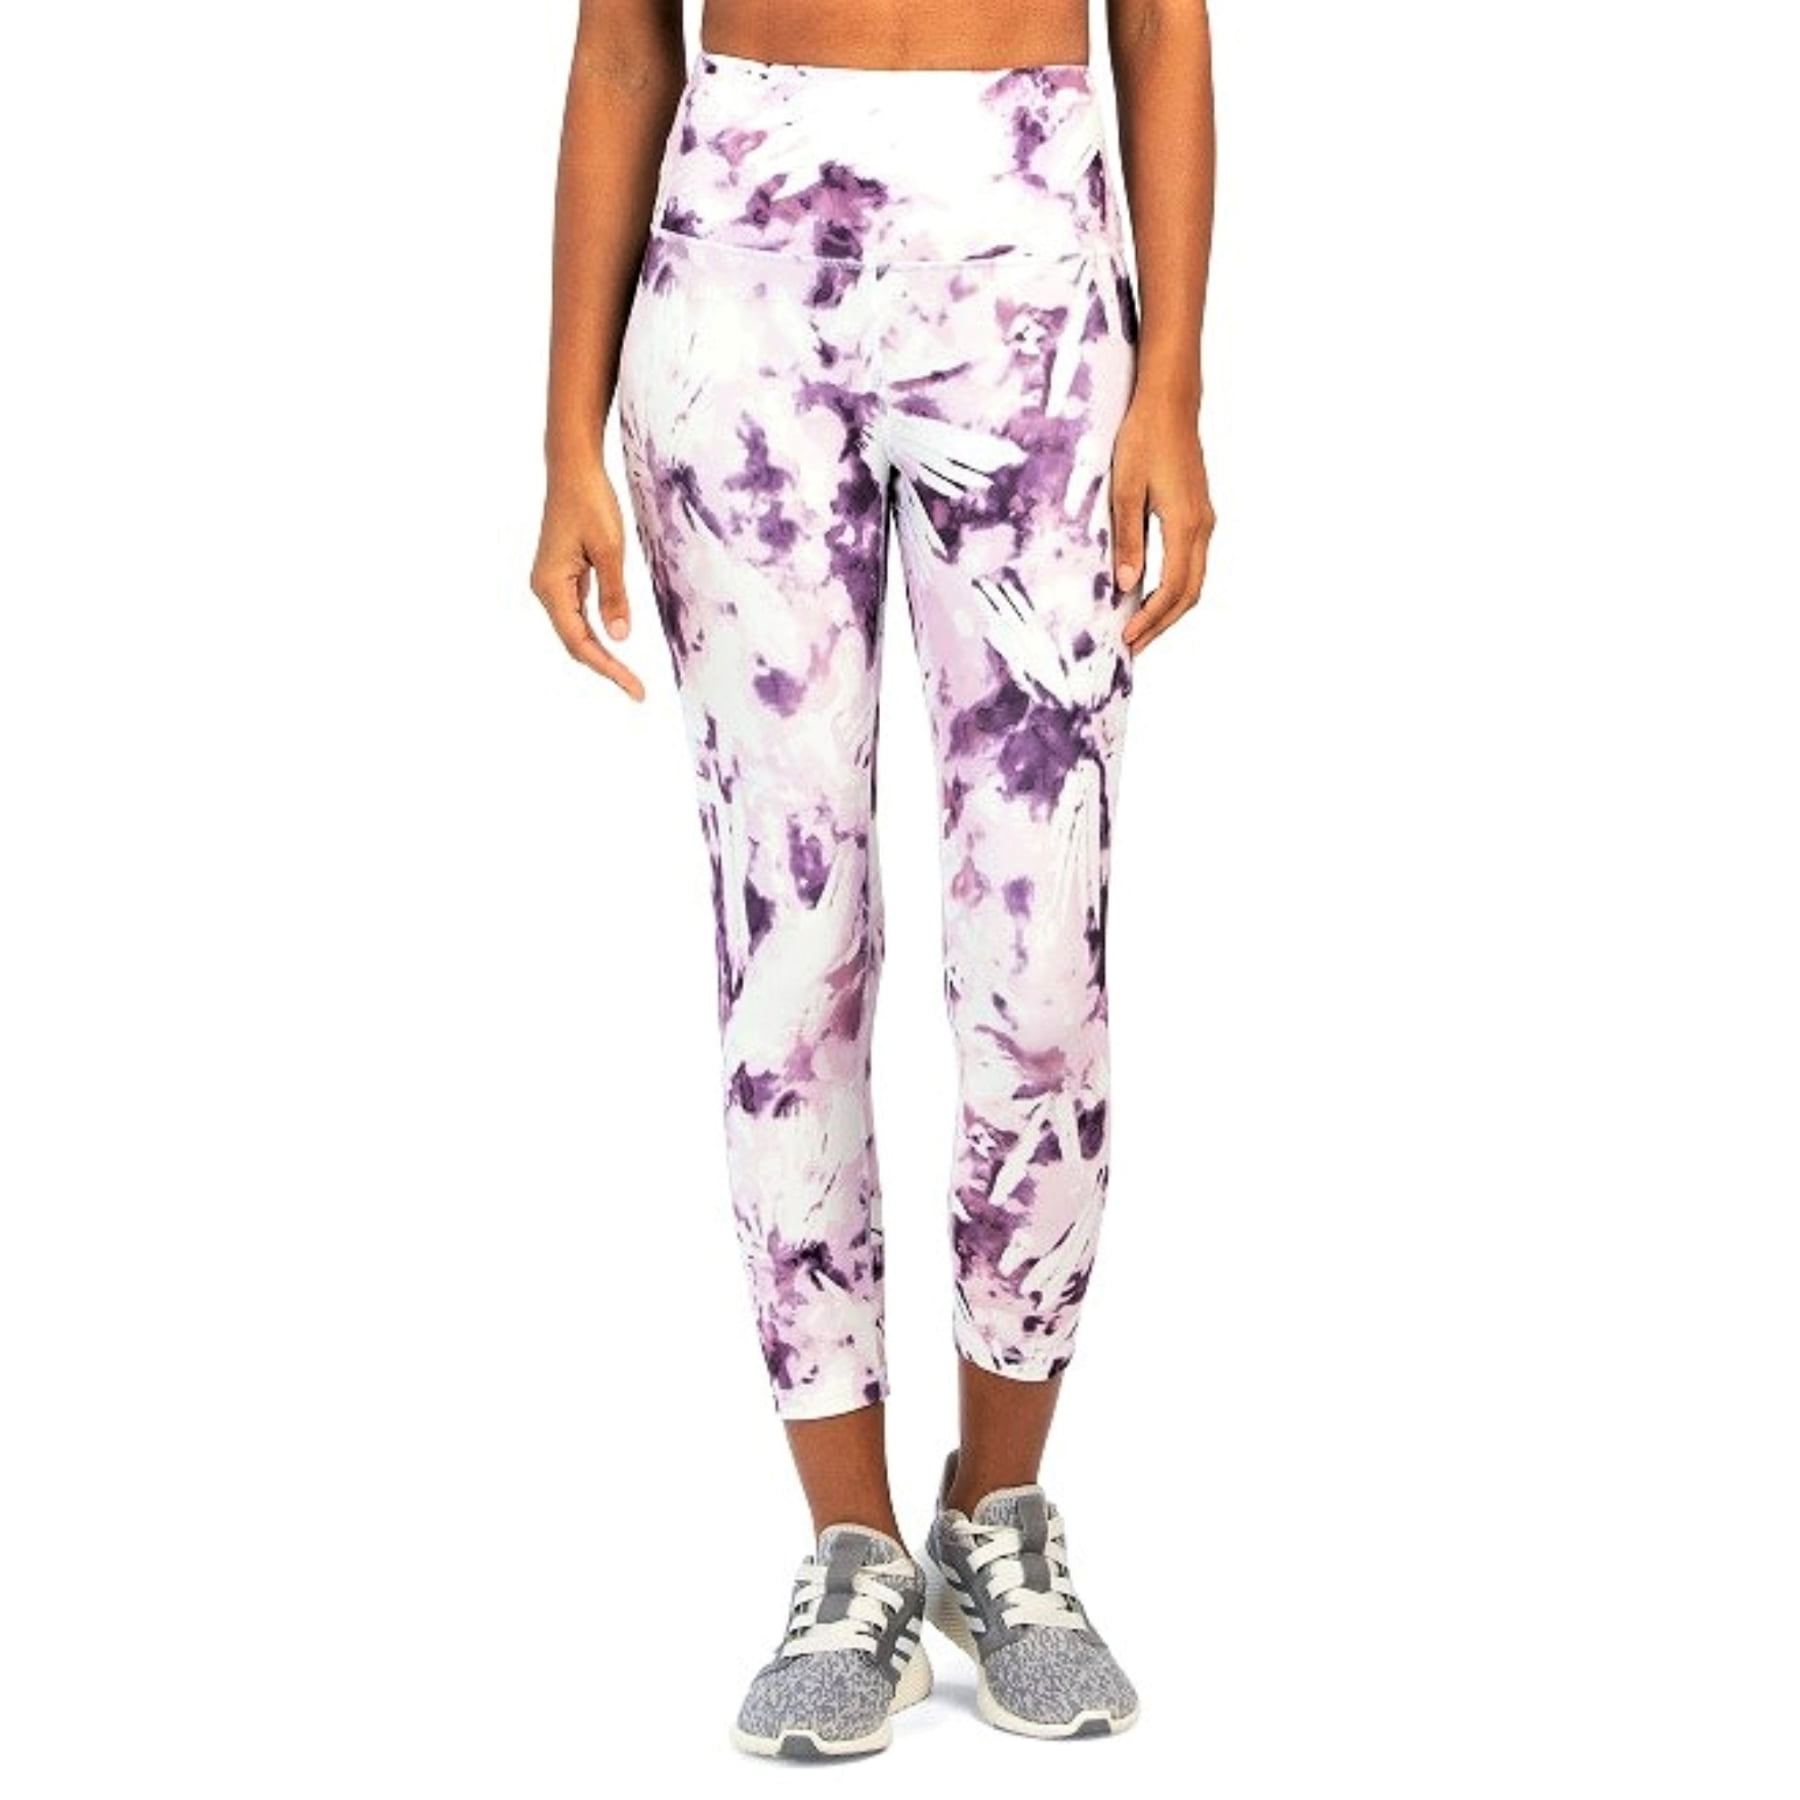 Balance Collection NWT Women's 7/8 Length Leggings Floral Blue Pink Size  Medium Multiple - $38 New With Tags - From Kyler